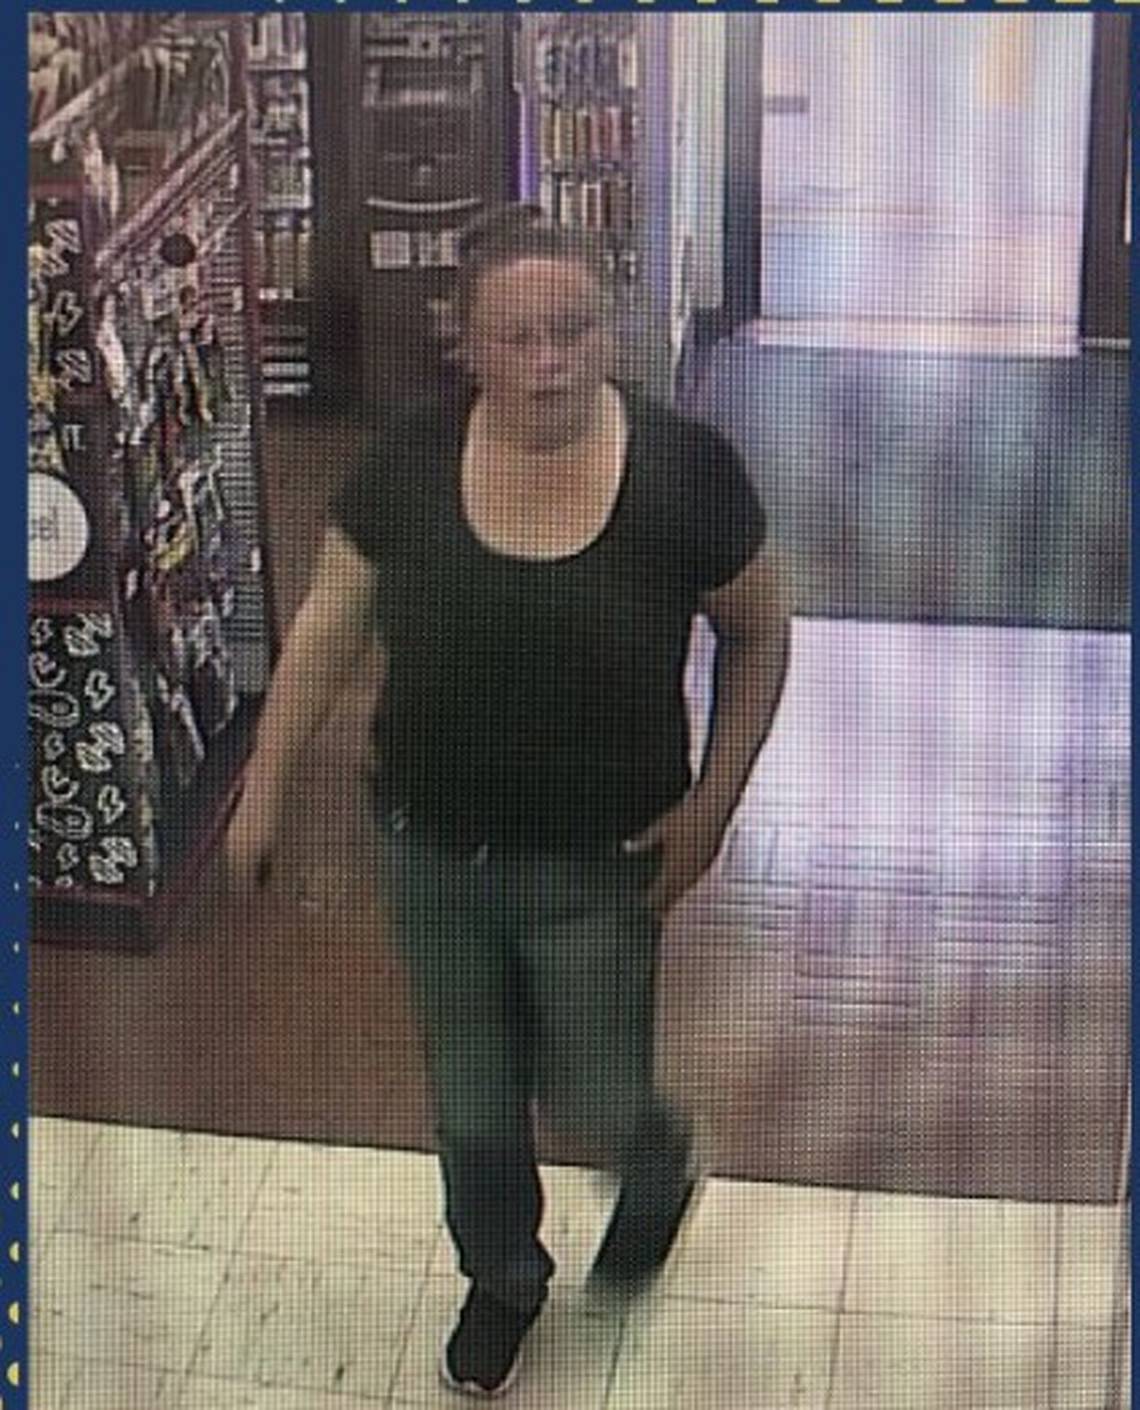 Olympia police release image of woman accused of arson outside convenience store